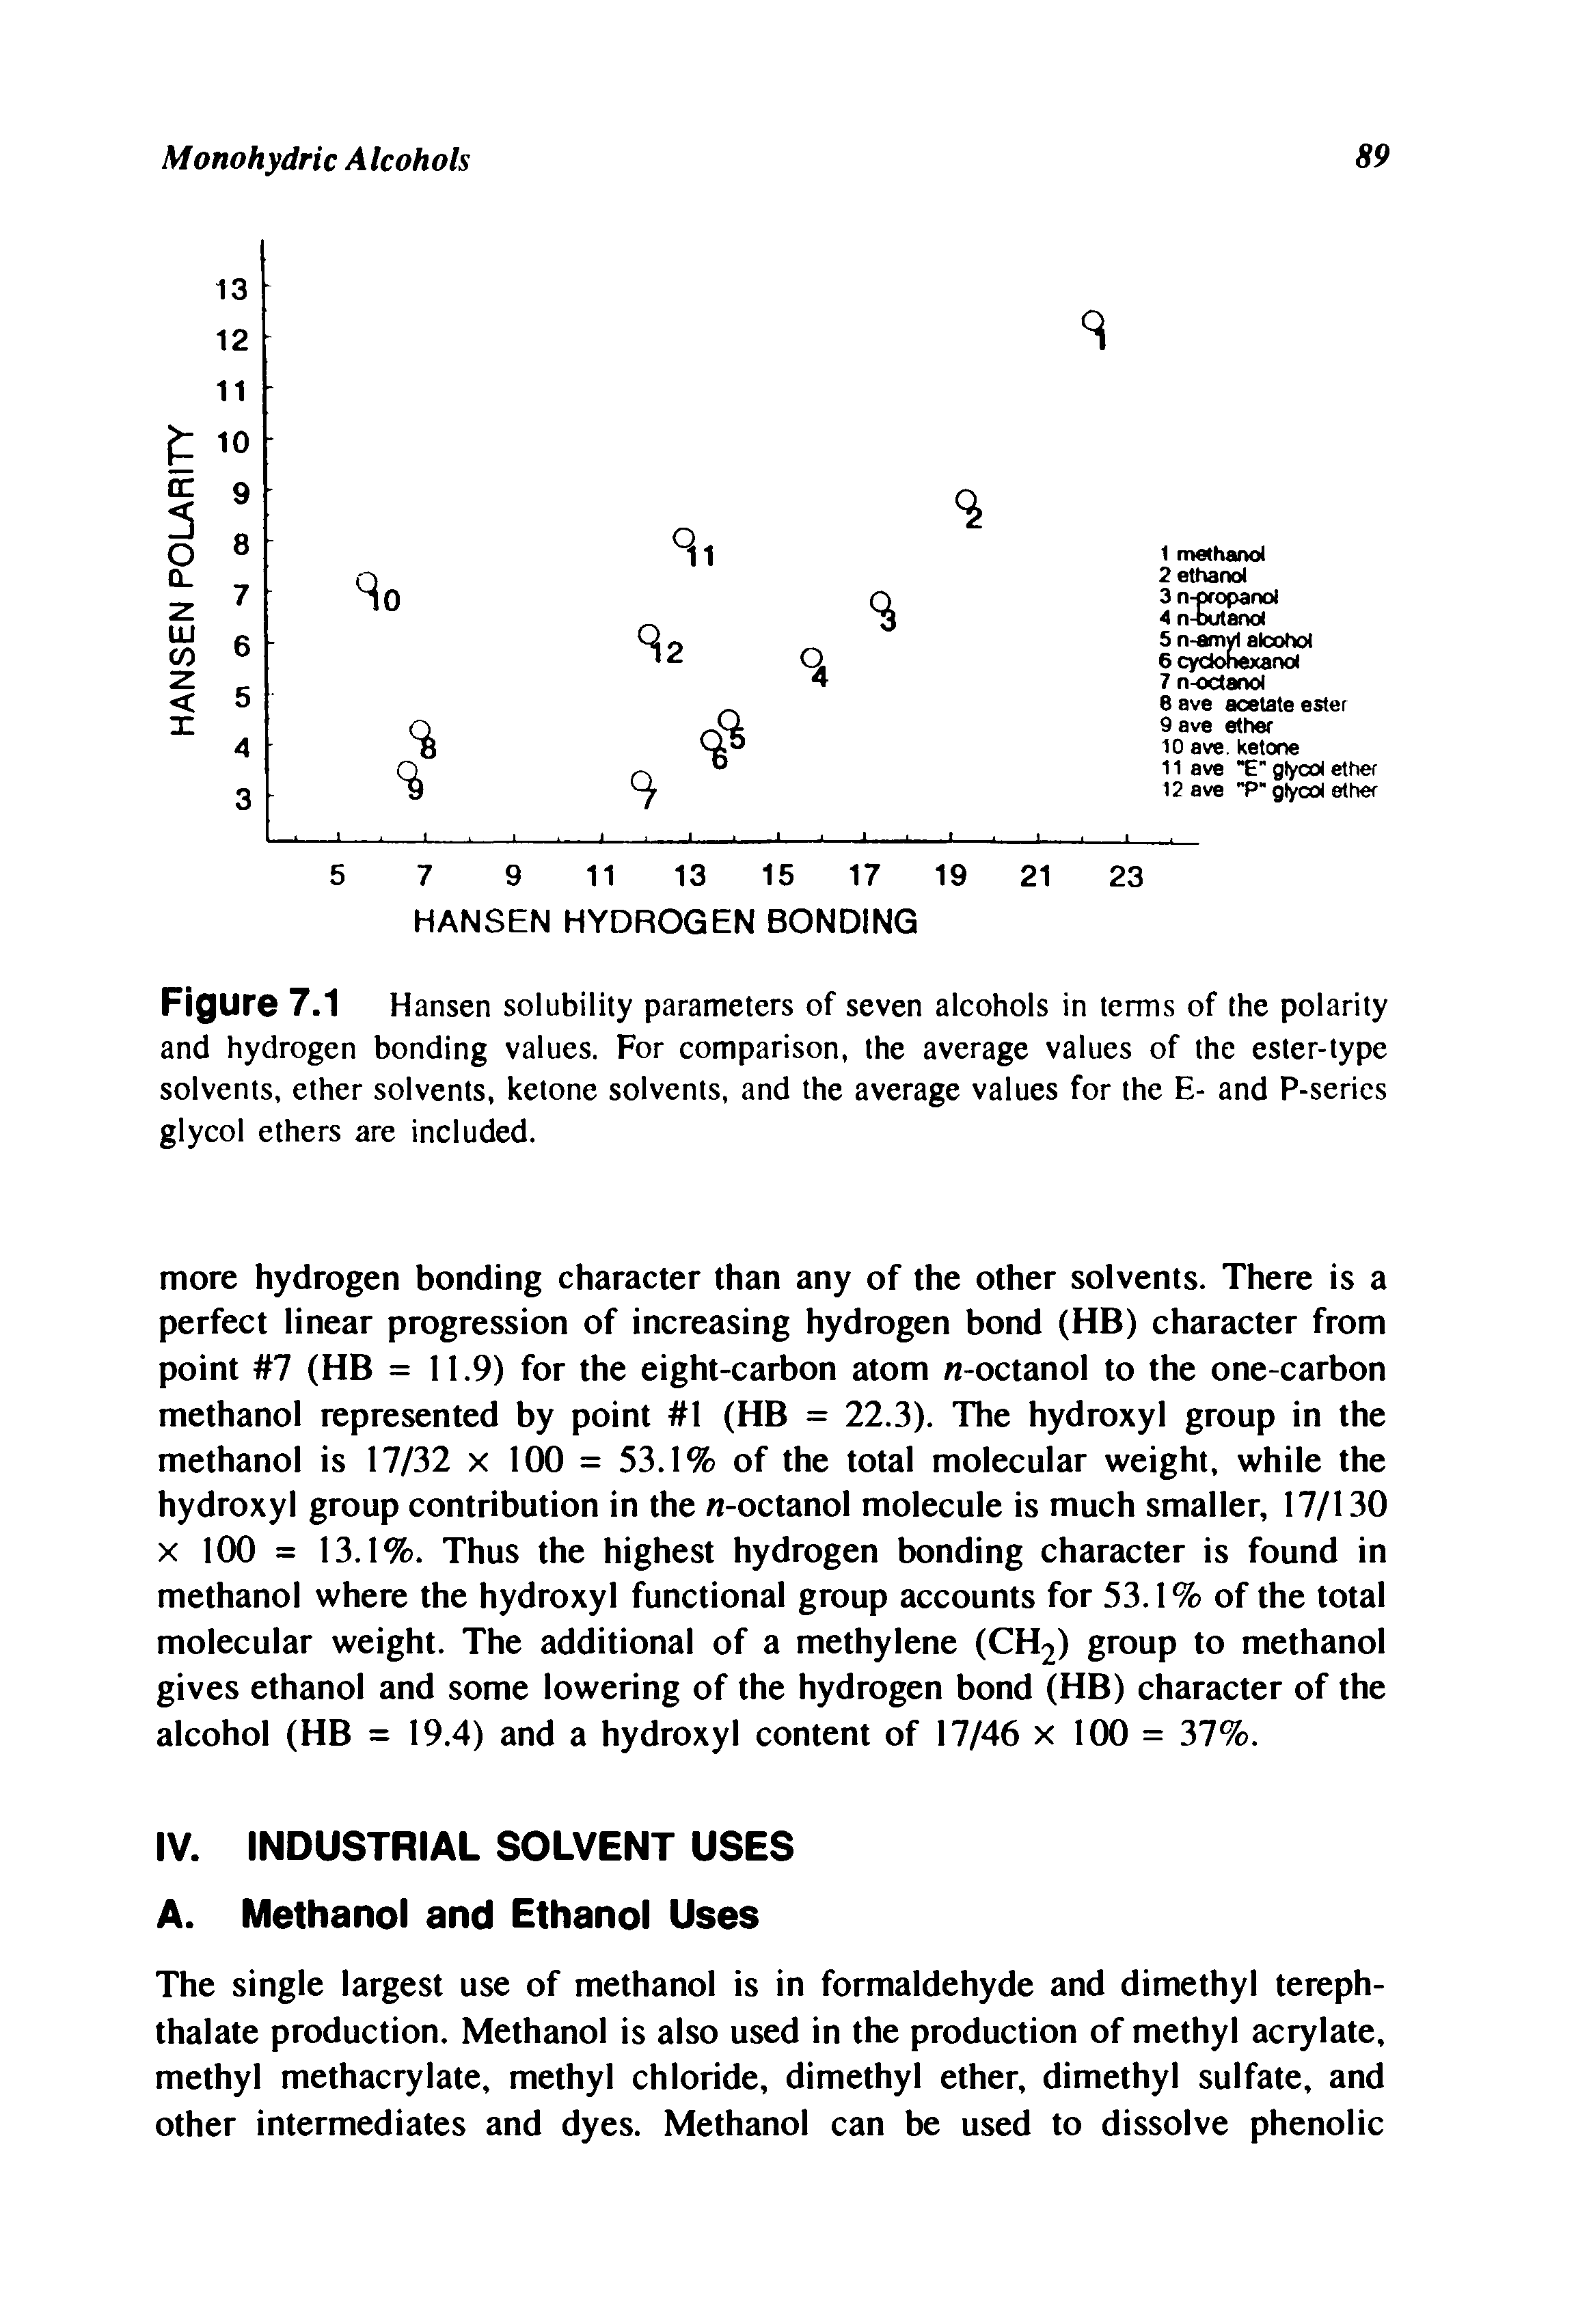 Figure 7.1 Hansen solubility parameters of seven alcohols in terms of the polarity and hydrogen bonding values. For comparison, the average values of the ester-type solvents, ether solvents, ketone solvents, and the average values for the E- and P-serics glycol ethers are included.